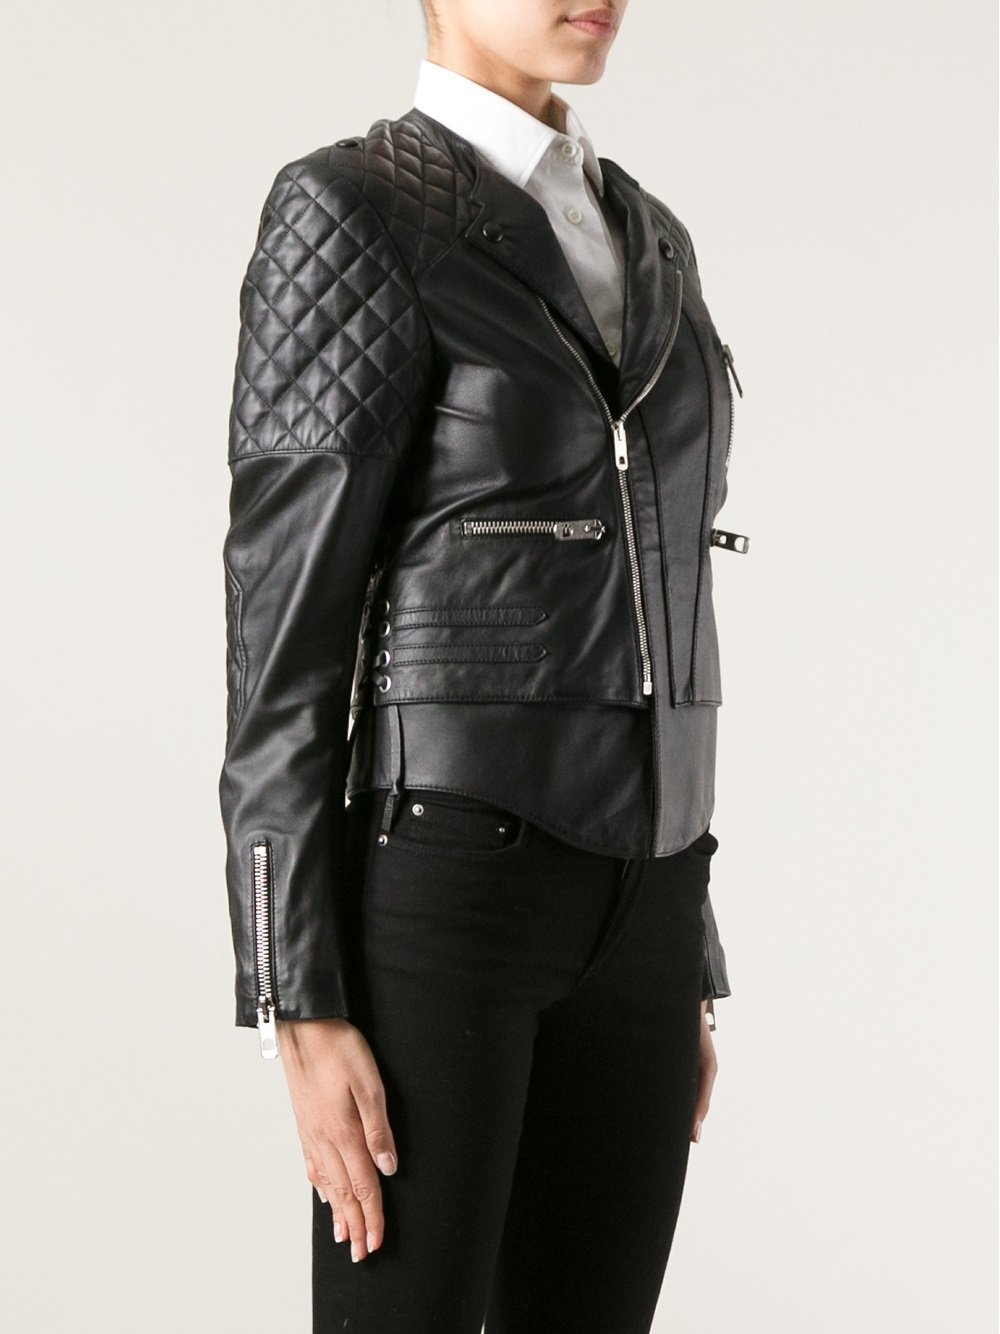 Lyst - Balenciaga Quilted Leather Biker Jacket in Black